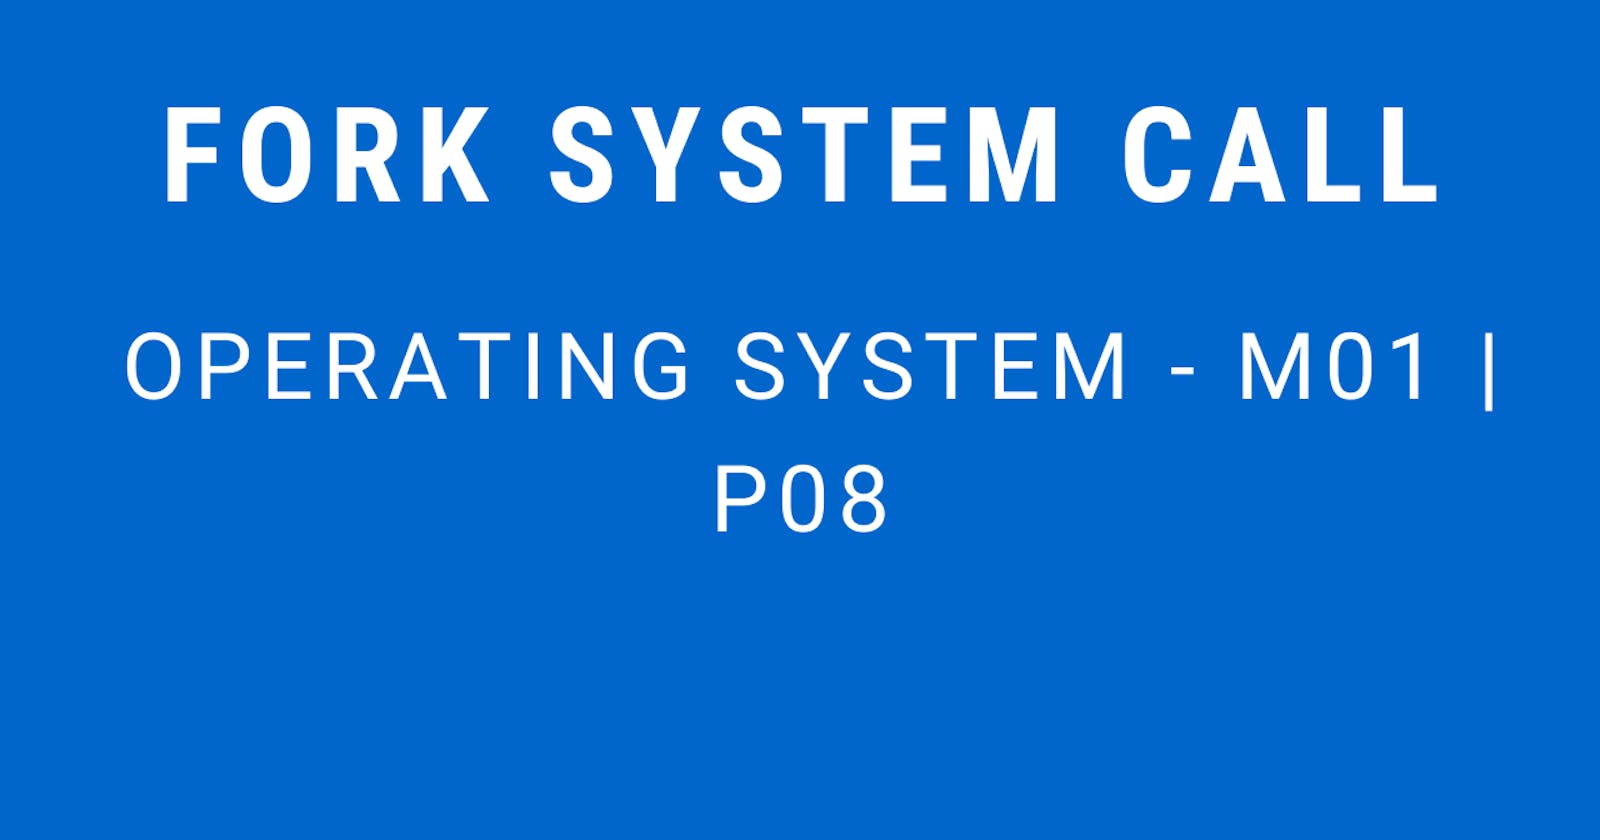 Fork System Call | Operating System - M01 P08